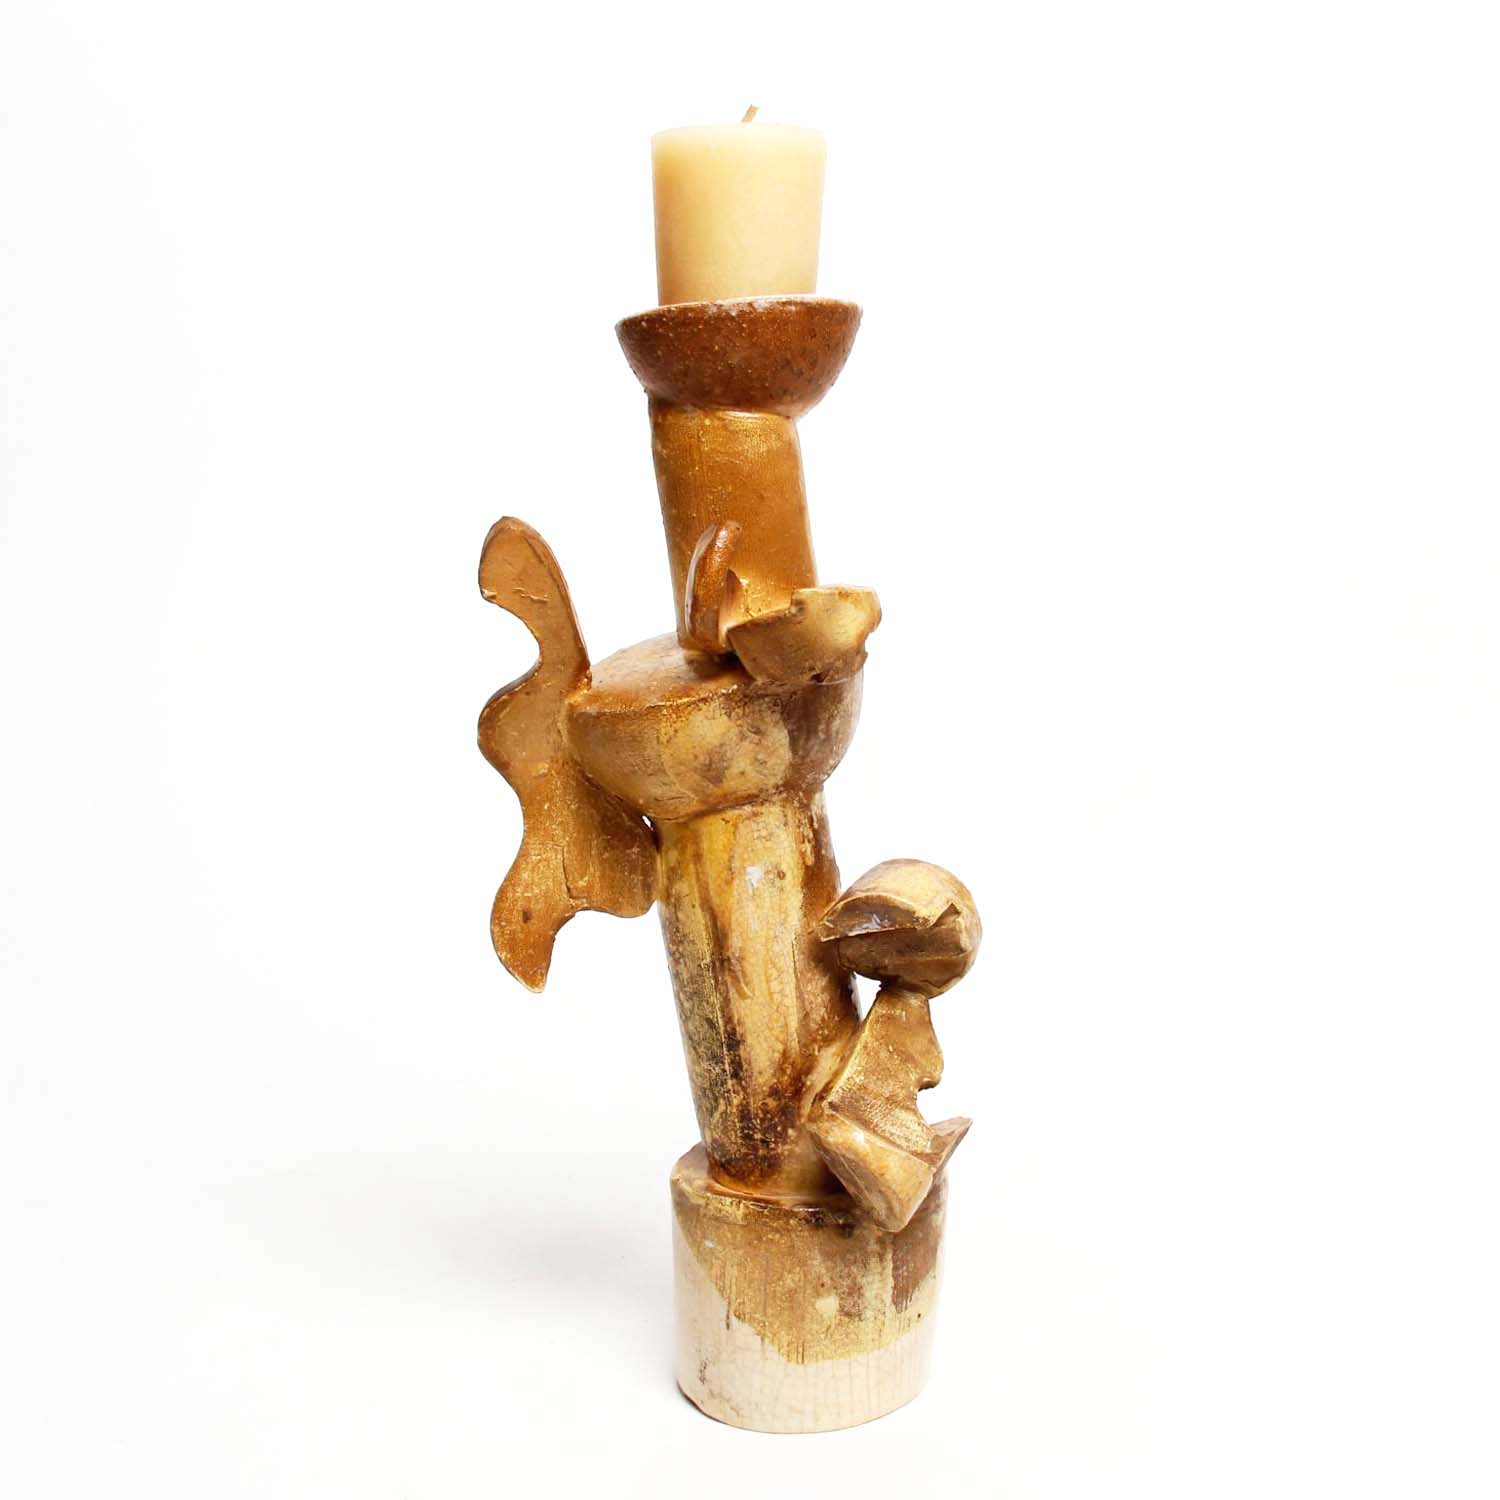 Annie McDonald: Large Candlestick (Each sold separately) Product Image 2 of 4